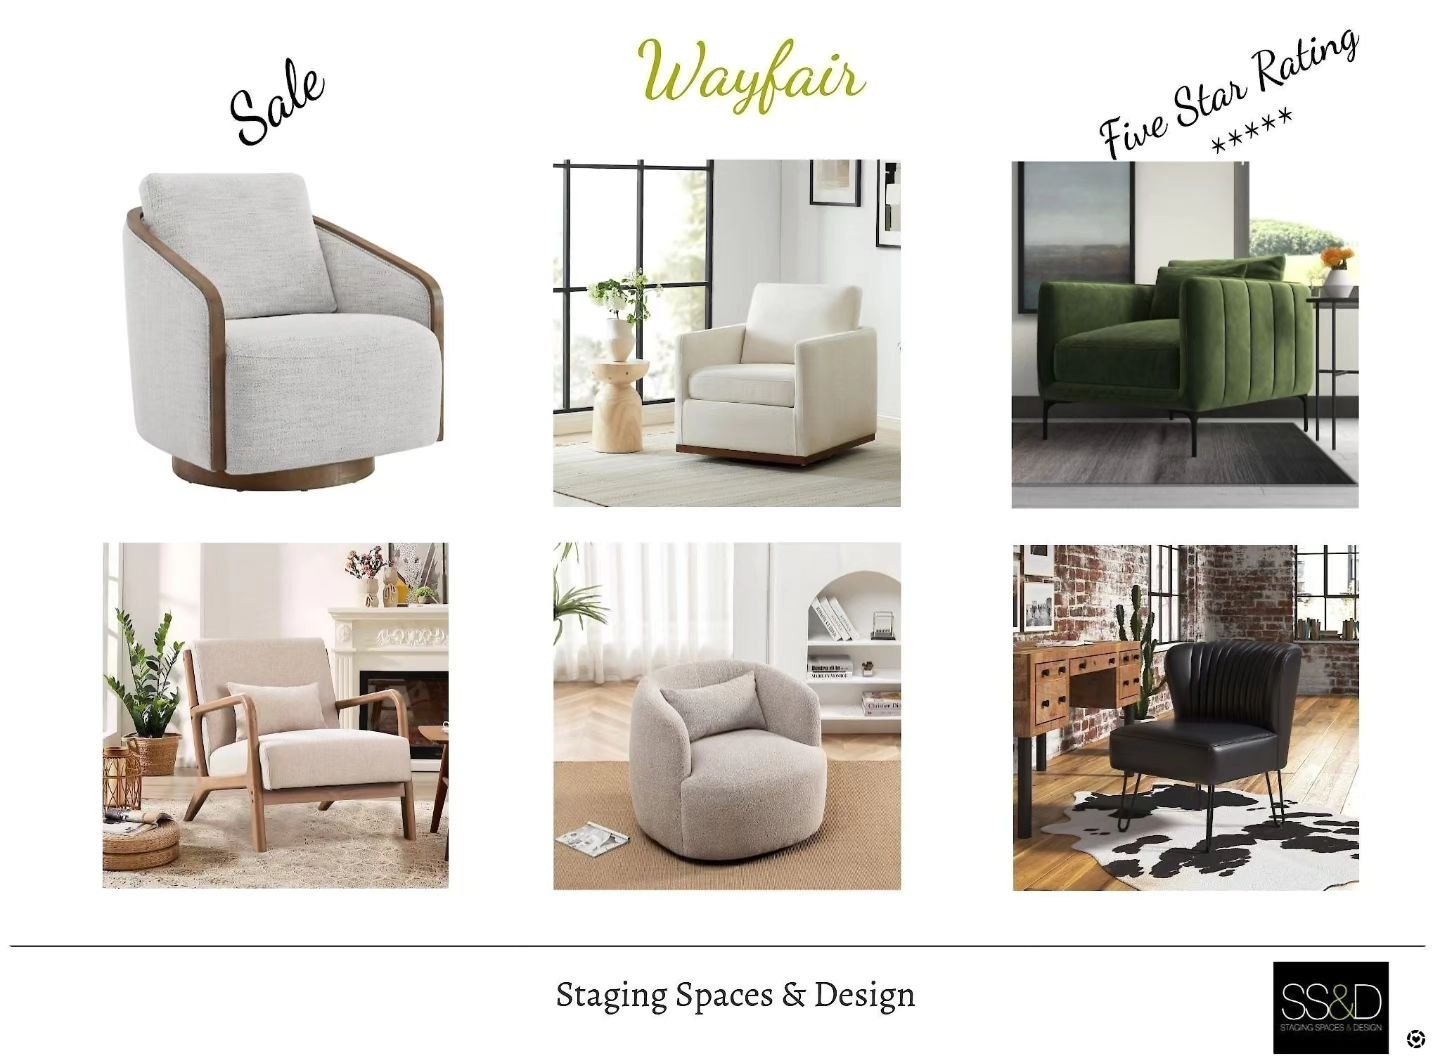 Looking to spruce up your space? 🛋 Don't miss out on the Wayfair chair sale featuring five-star rated chairs! Visit my LTK shop to find the perfect addition to your home. Hurry, these deals won't last long! #WayfairSale #ChairSale #HomeDecor

Sale p